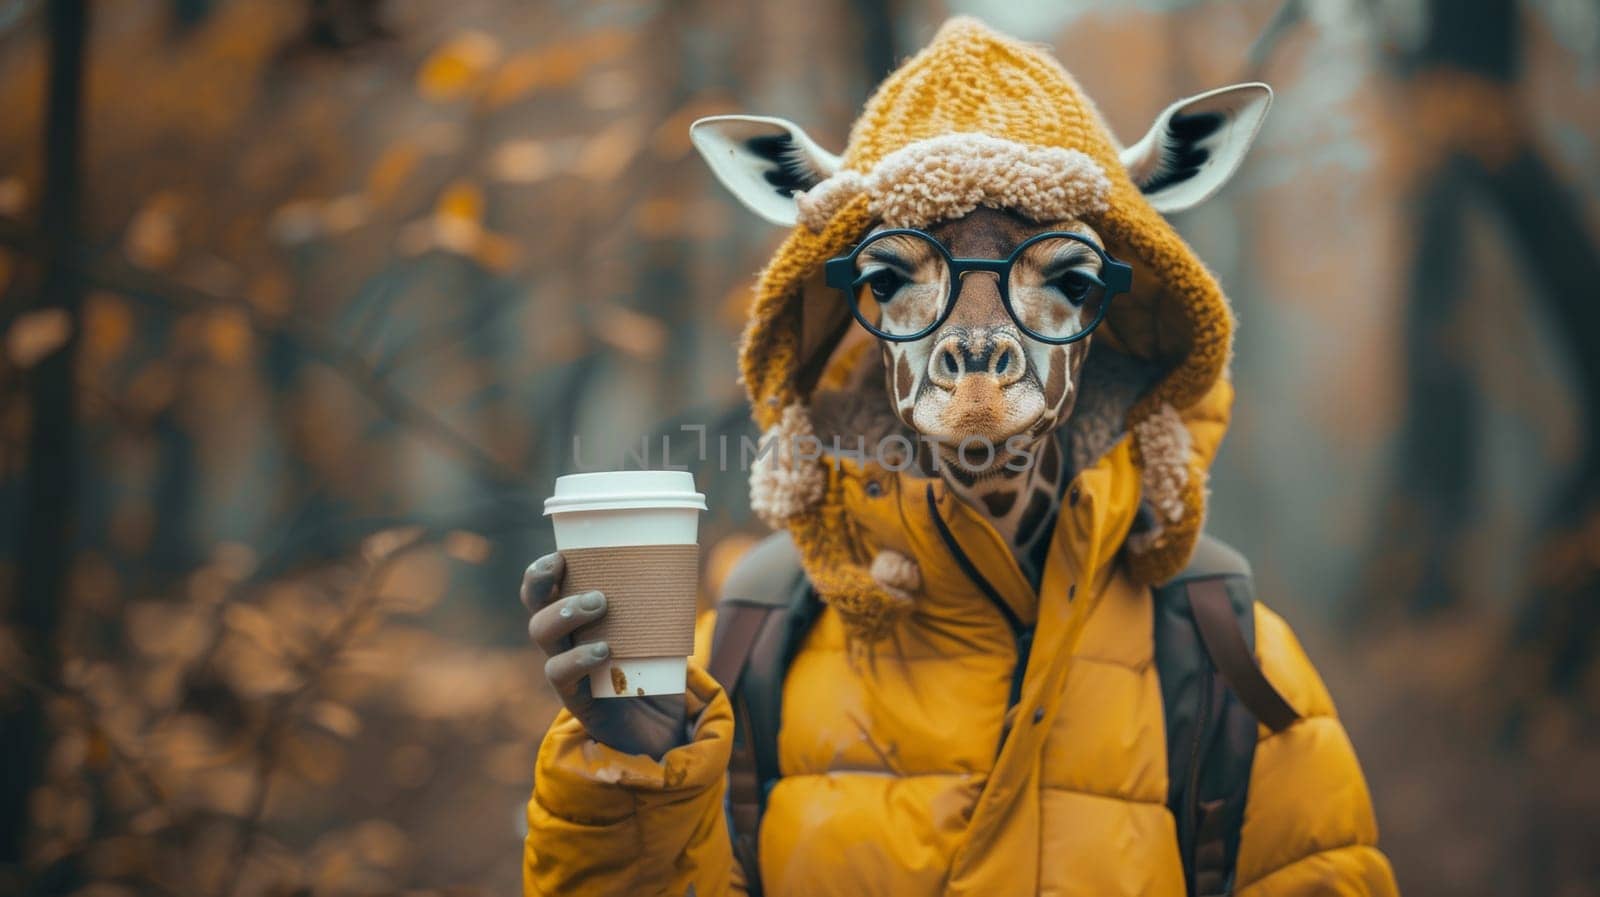 A giraffe wearing a yellow jacket and holding coffee